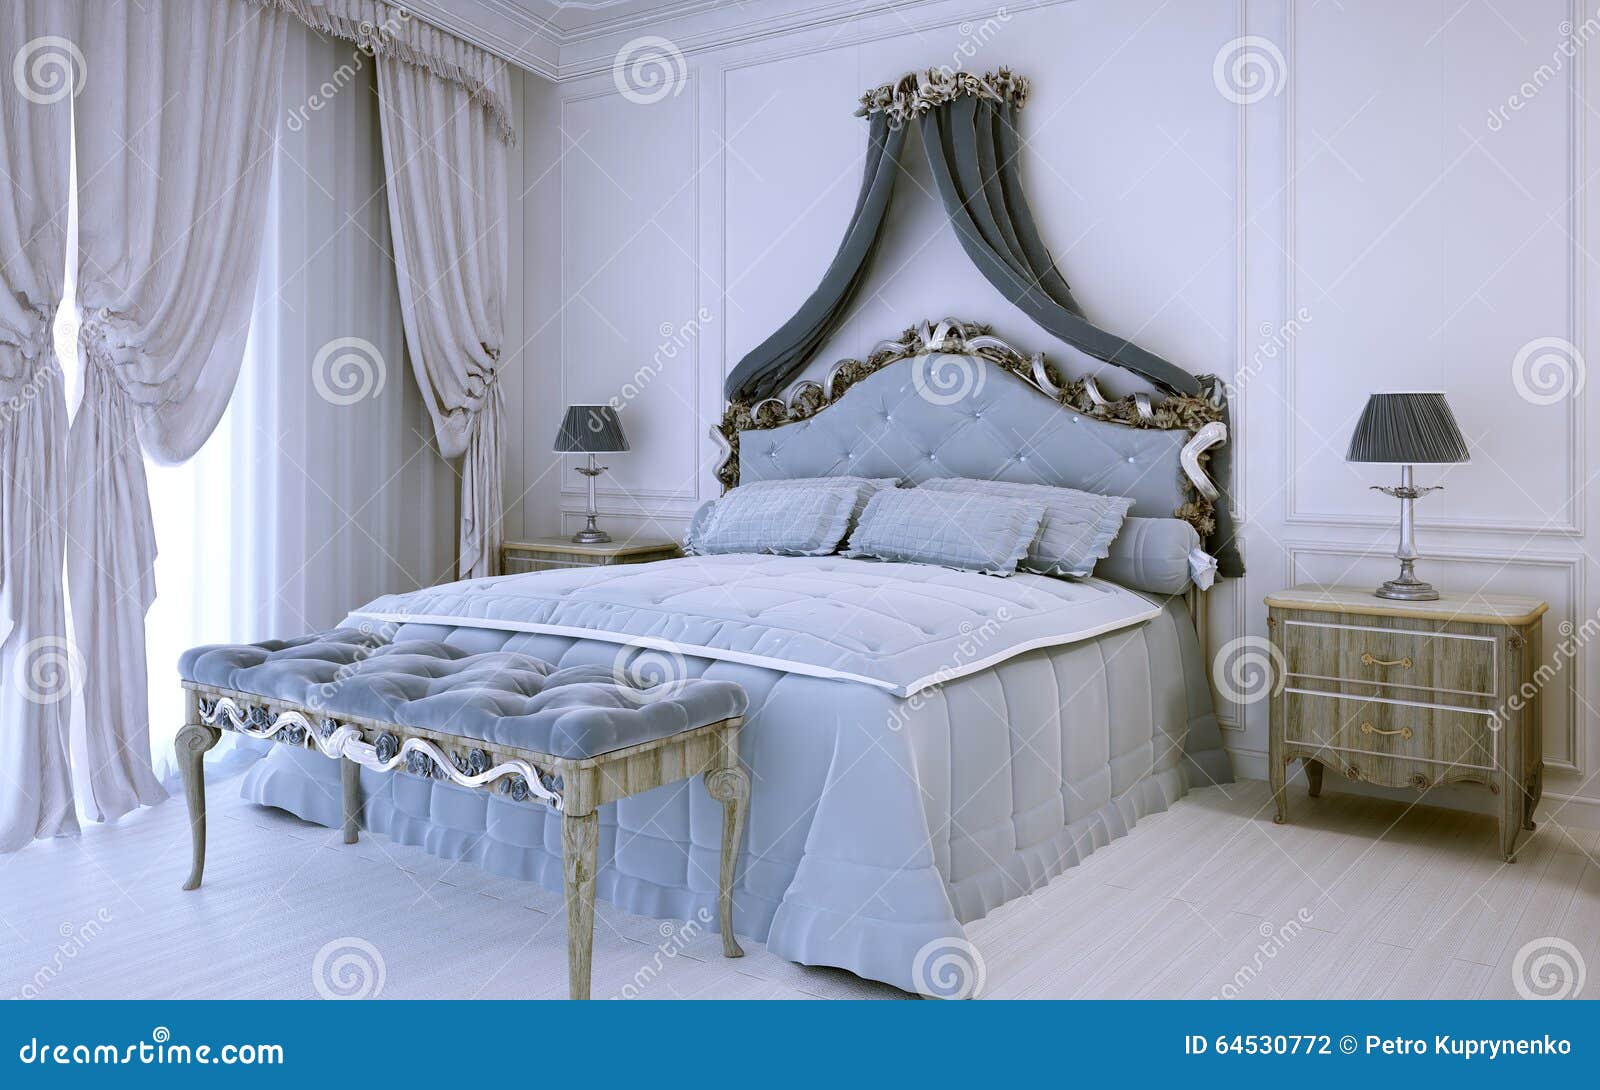 white luxury bedroom in neoclassic style